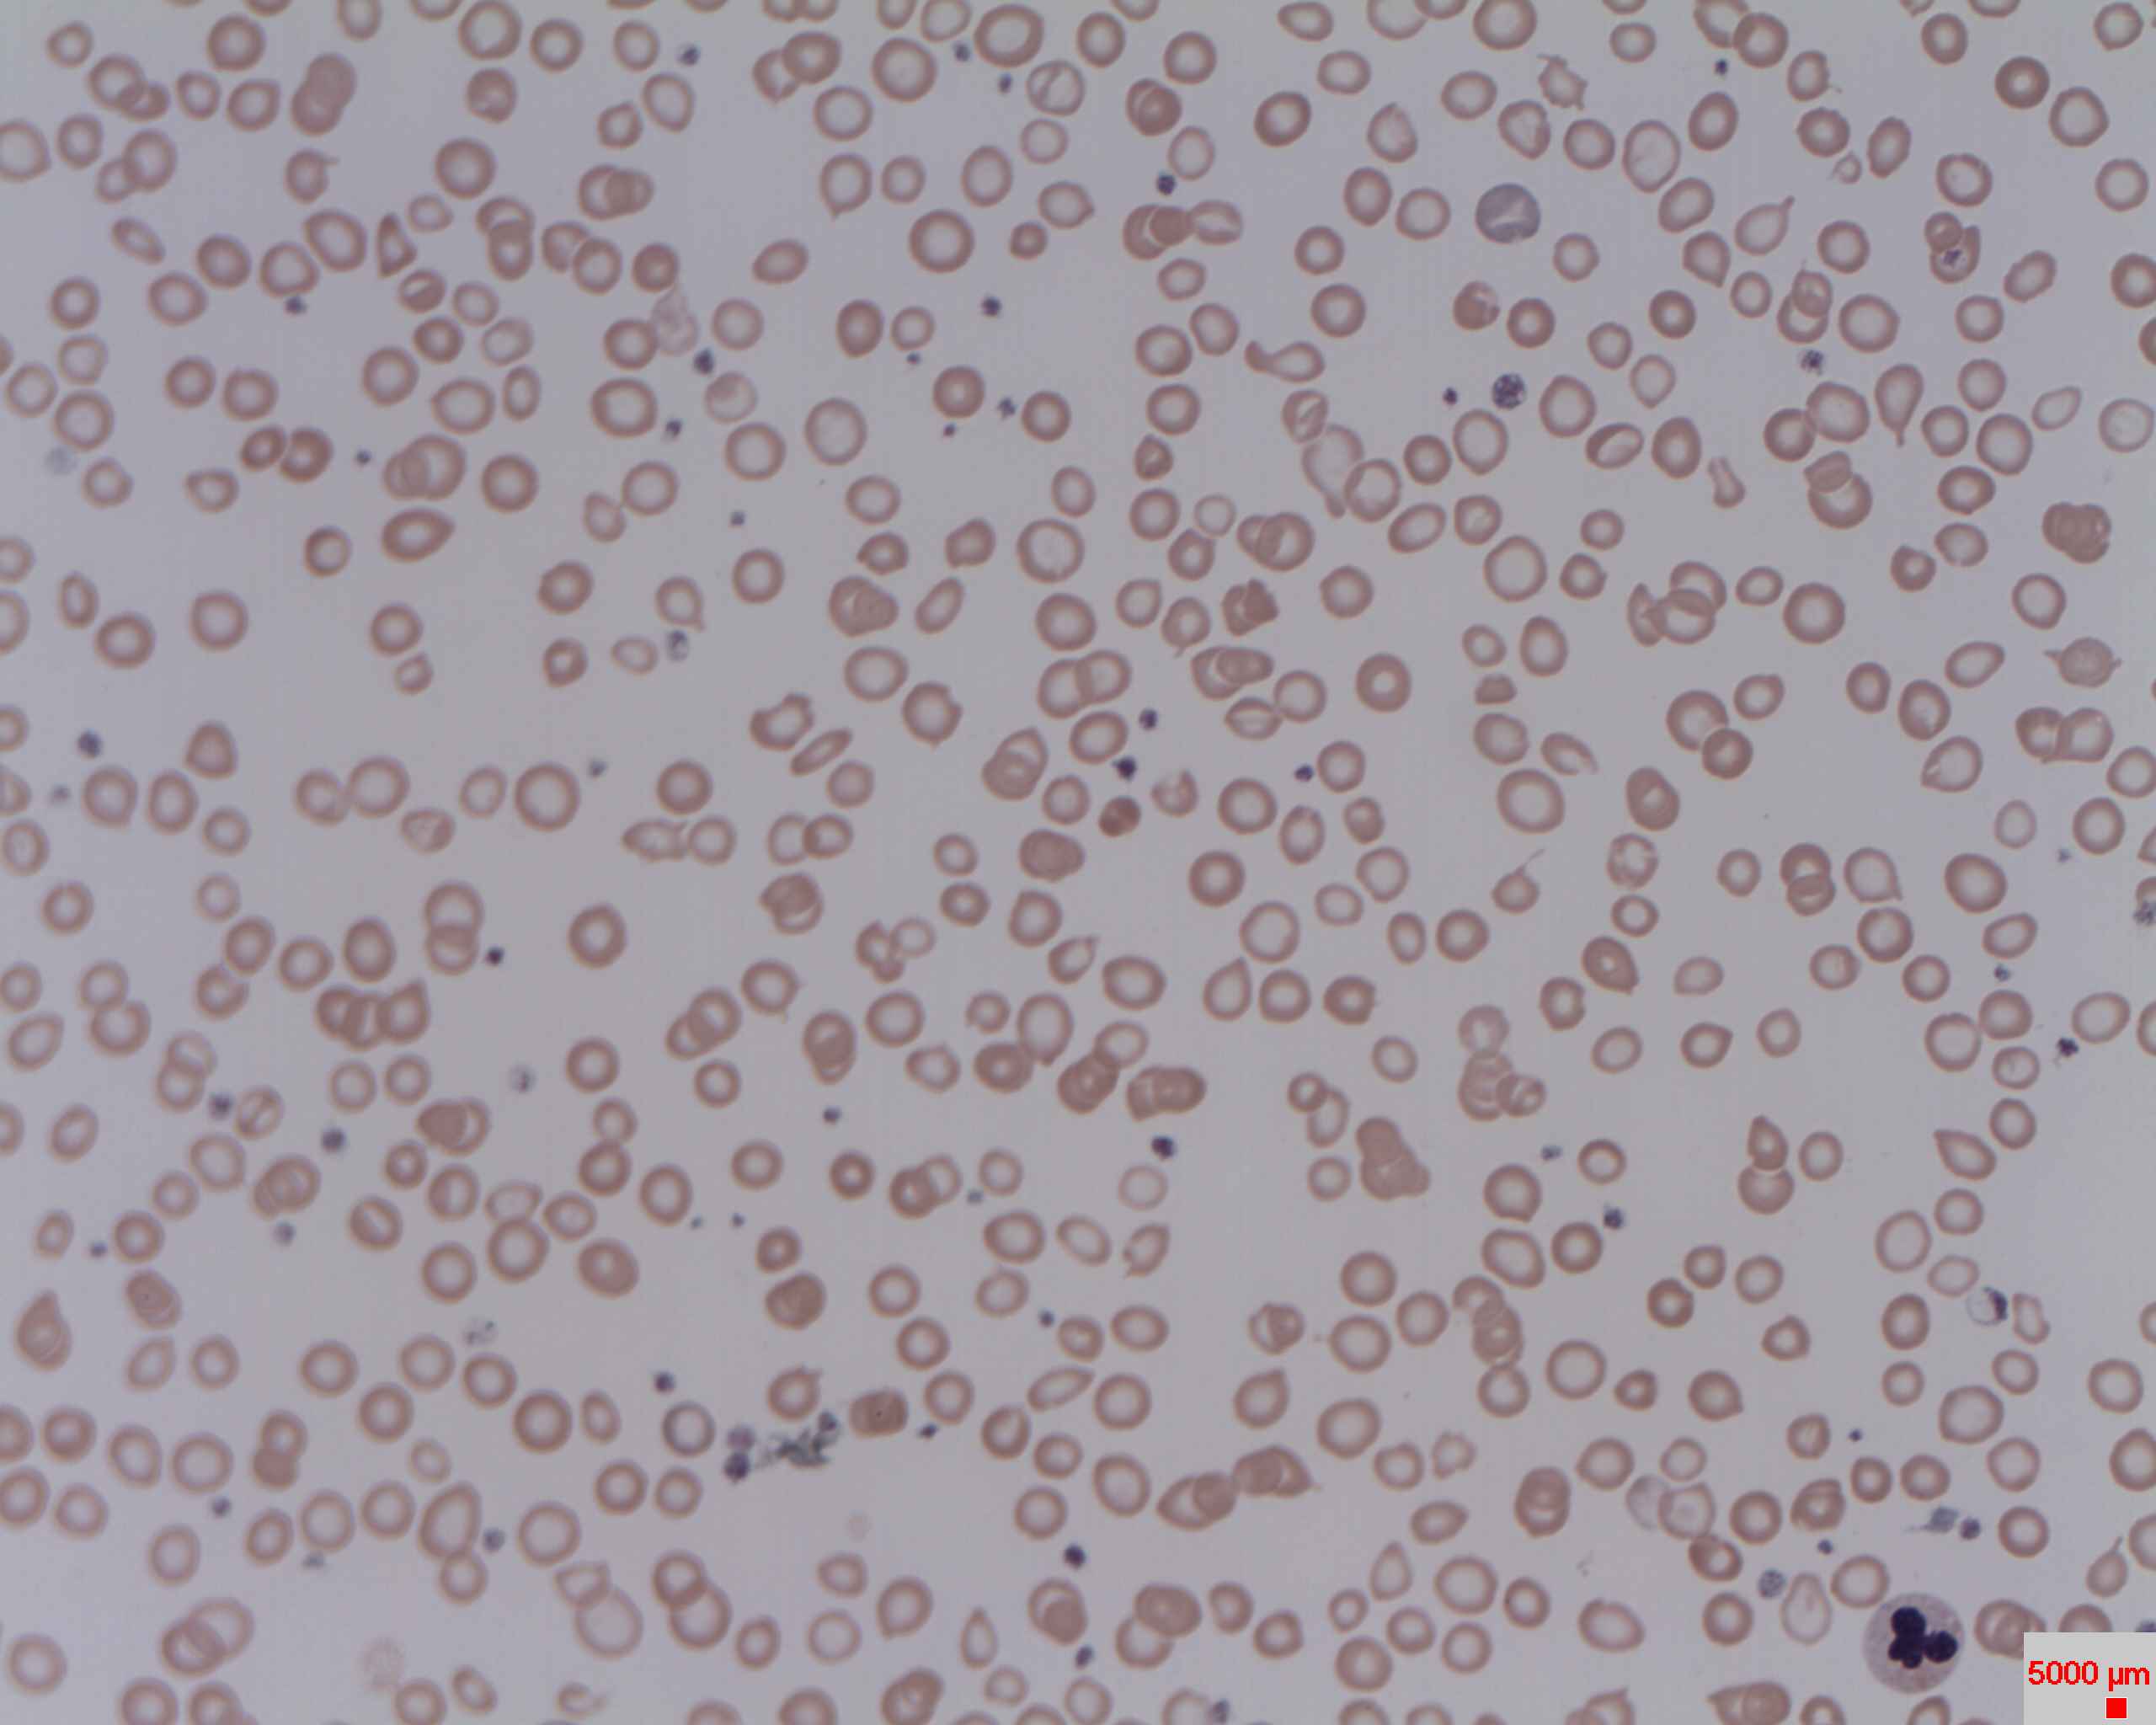 Iron deficiency anaemia is a condition where a lack of iron in the body leads to a reduction in the number of red blood cells. It is associated with a microcytic and hypochromic red cell picture.By Erhabor Osaro (Associate Professor) (Own work) [CC-BY-SA-